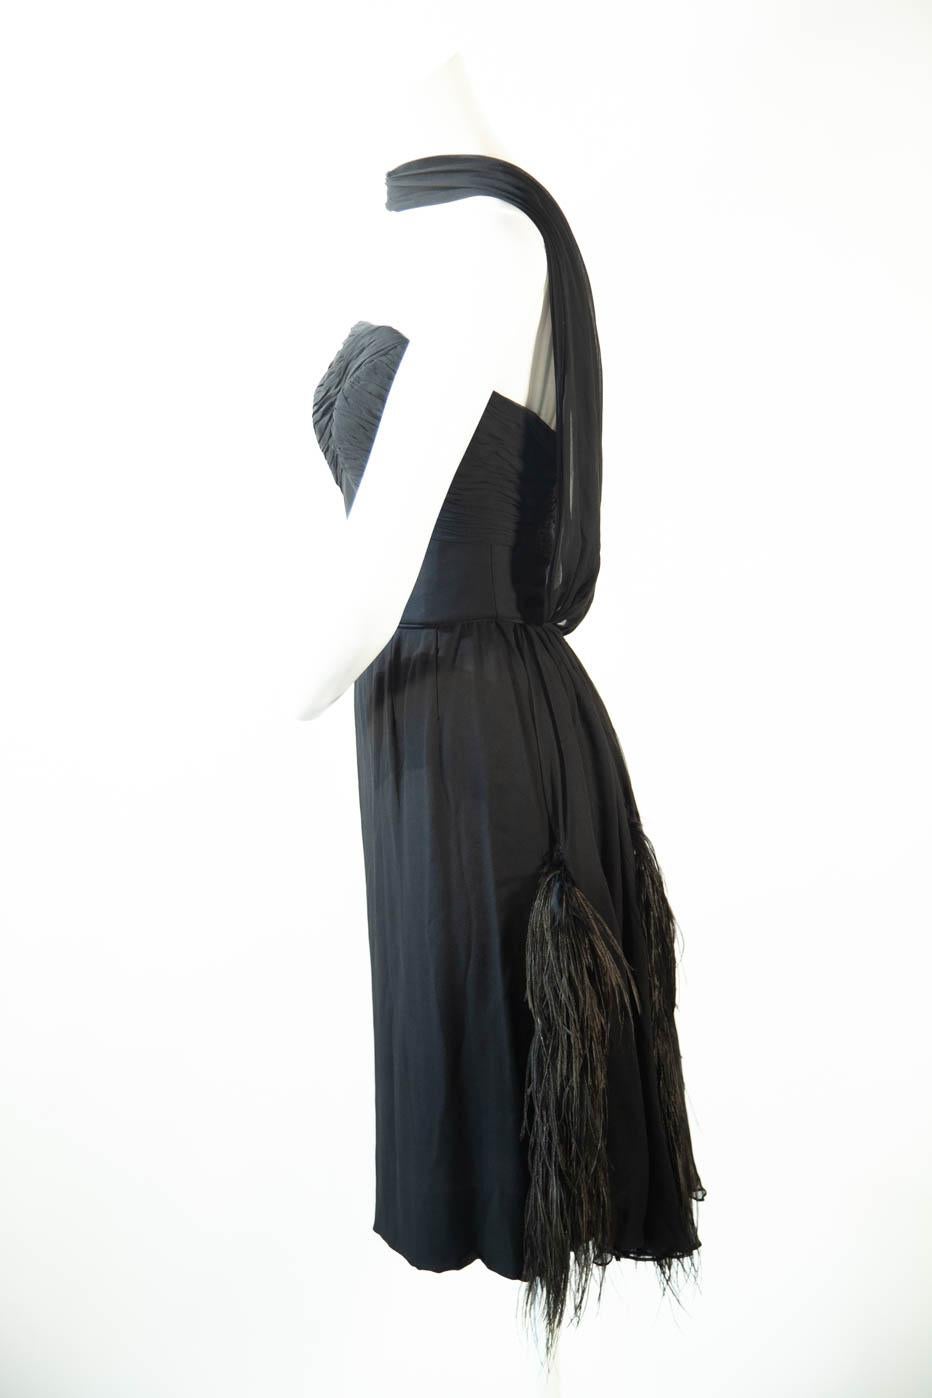 Edward Abbot couture dress owned by celebrity (please ask for provenance) one-shoulder, ostrich feather skirt. Silk.

Provenance, please inquire.